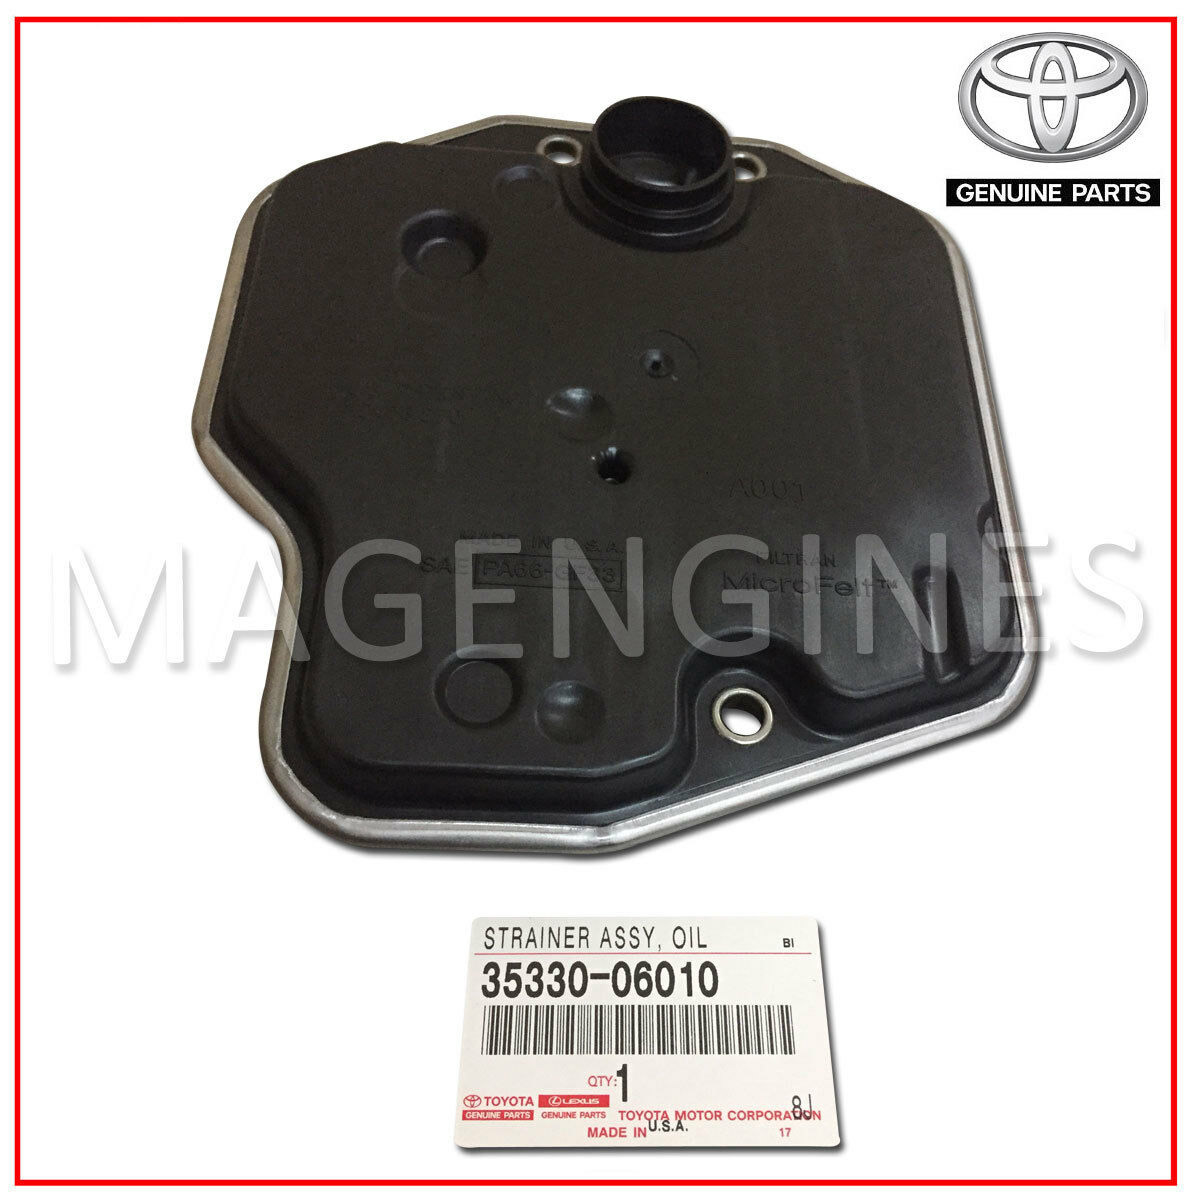 Details about   Transmission Oil Strainer w/ O-Ring & Gasket Kit For Lexus Toyota 3533006010 New